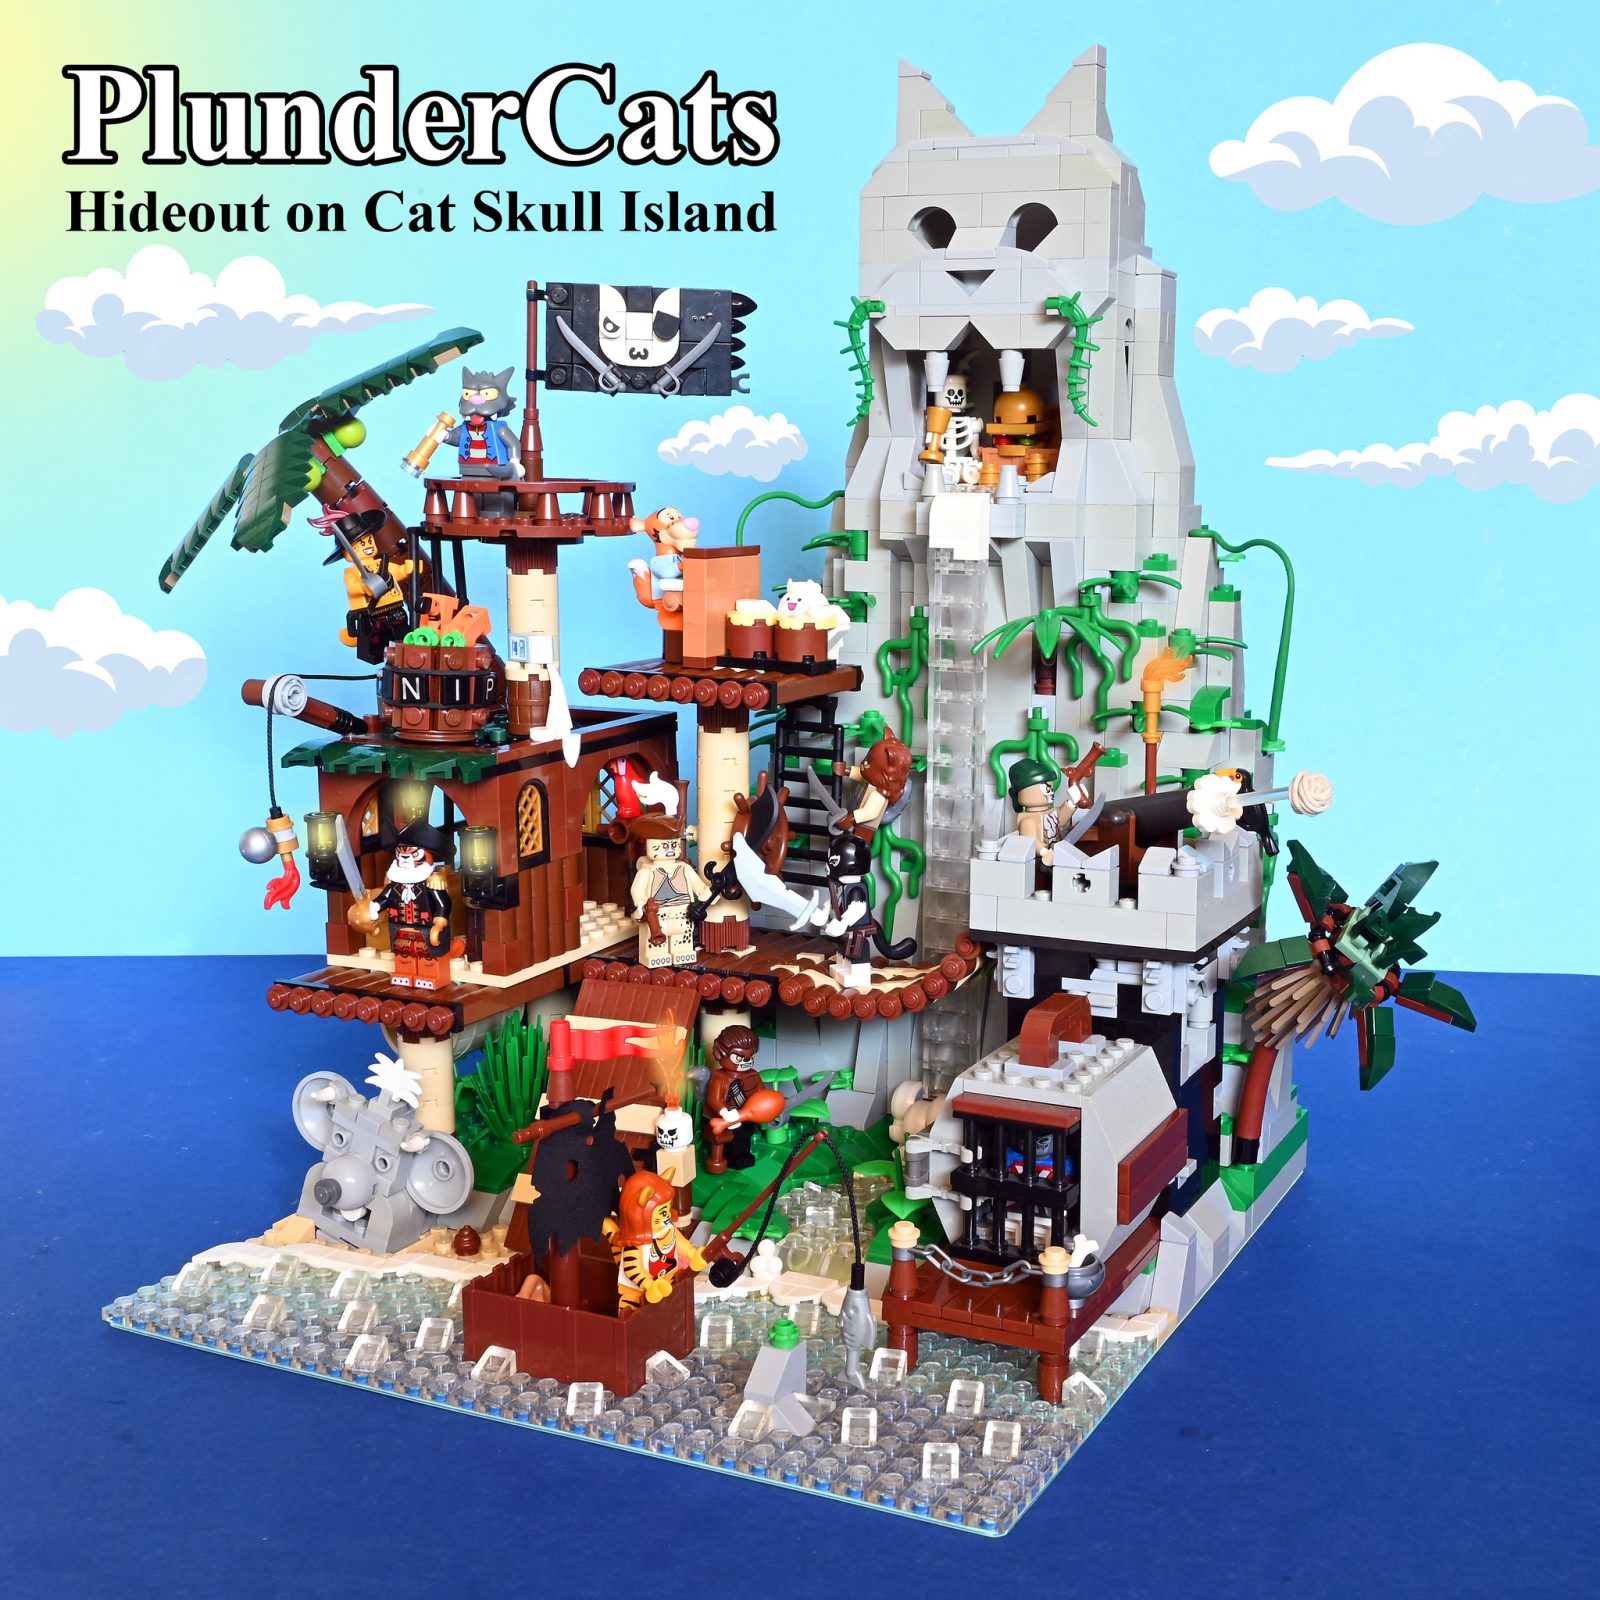 Featured Image for “PlunderCats: Hideout on Cat Skull Island” by Oky